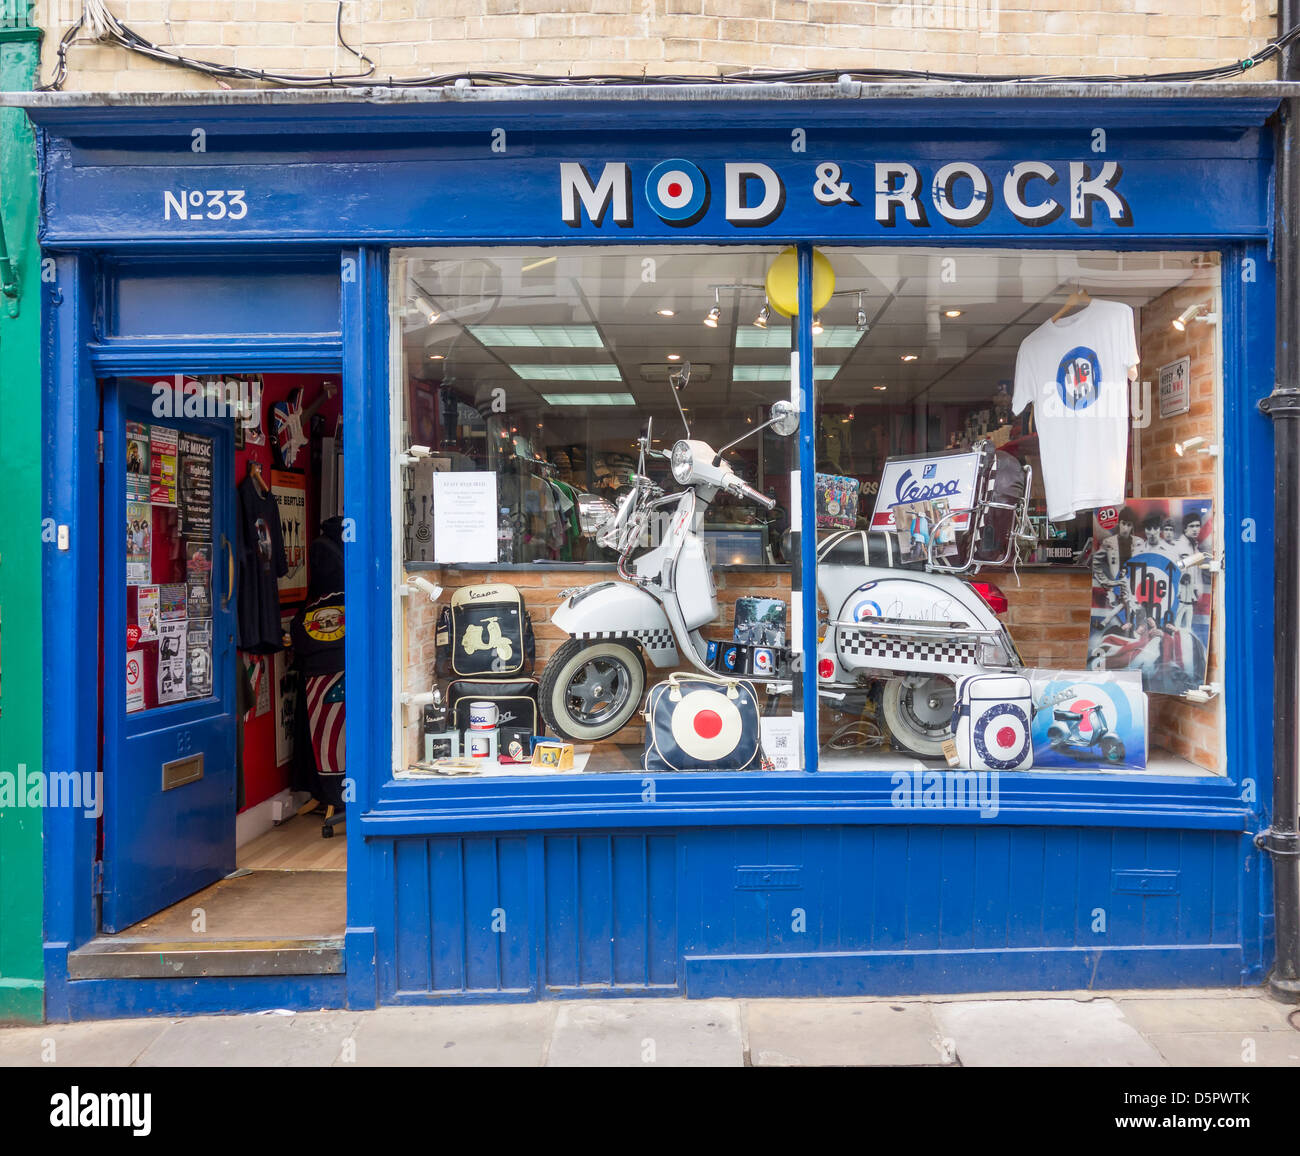 Mods and Rockers 60s Revival Shop Mod and Rock Burgate Canterbury. Foto Stock